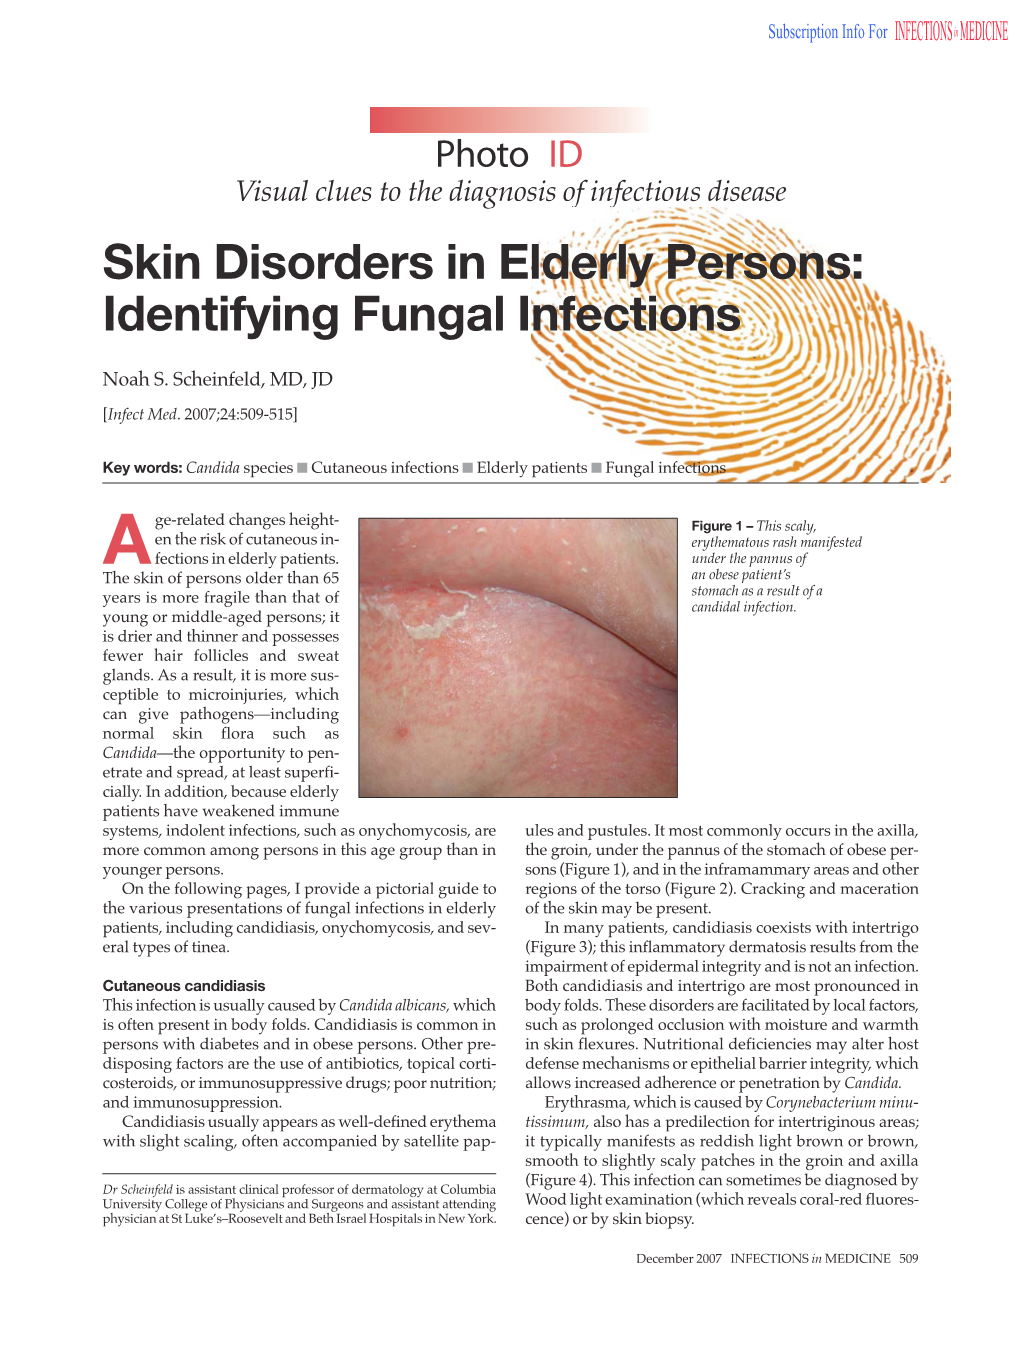 Skin Disorders in Elderly Persons: Identifying Fungal Infections